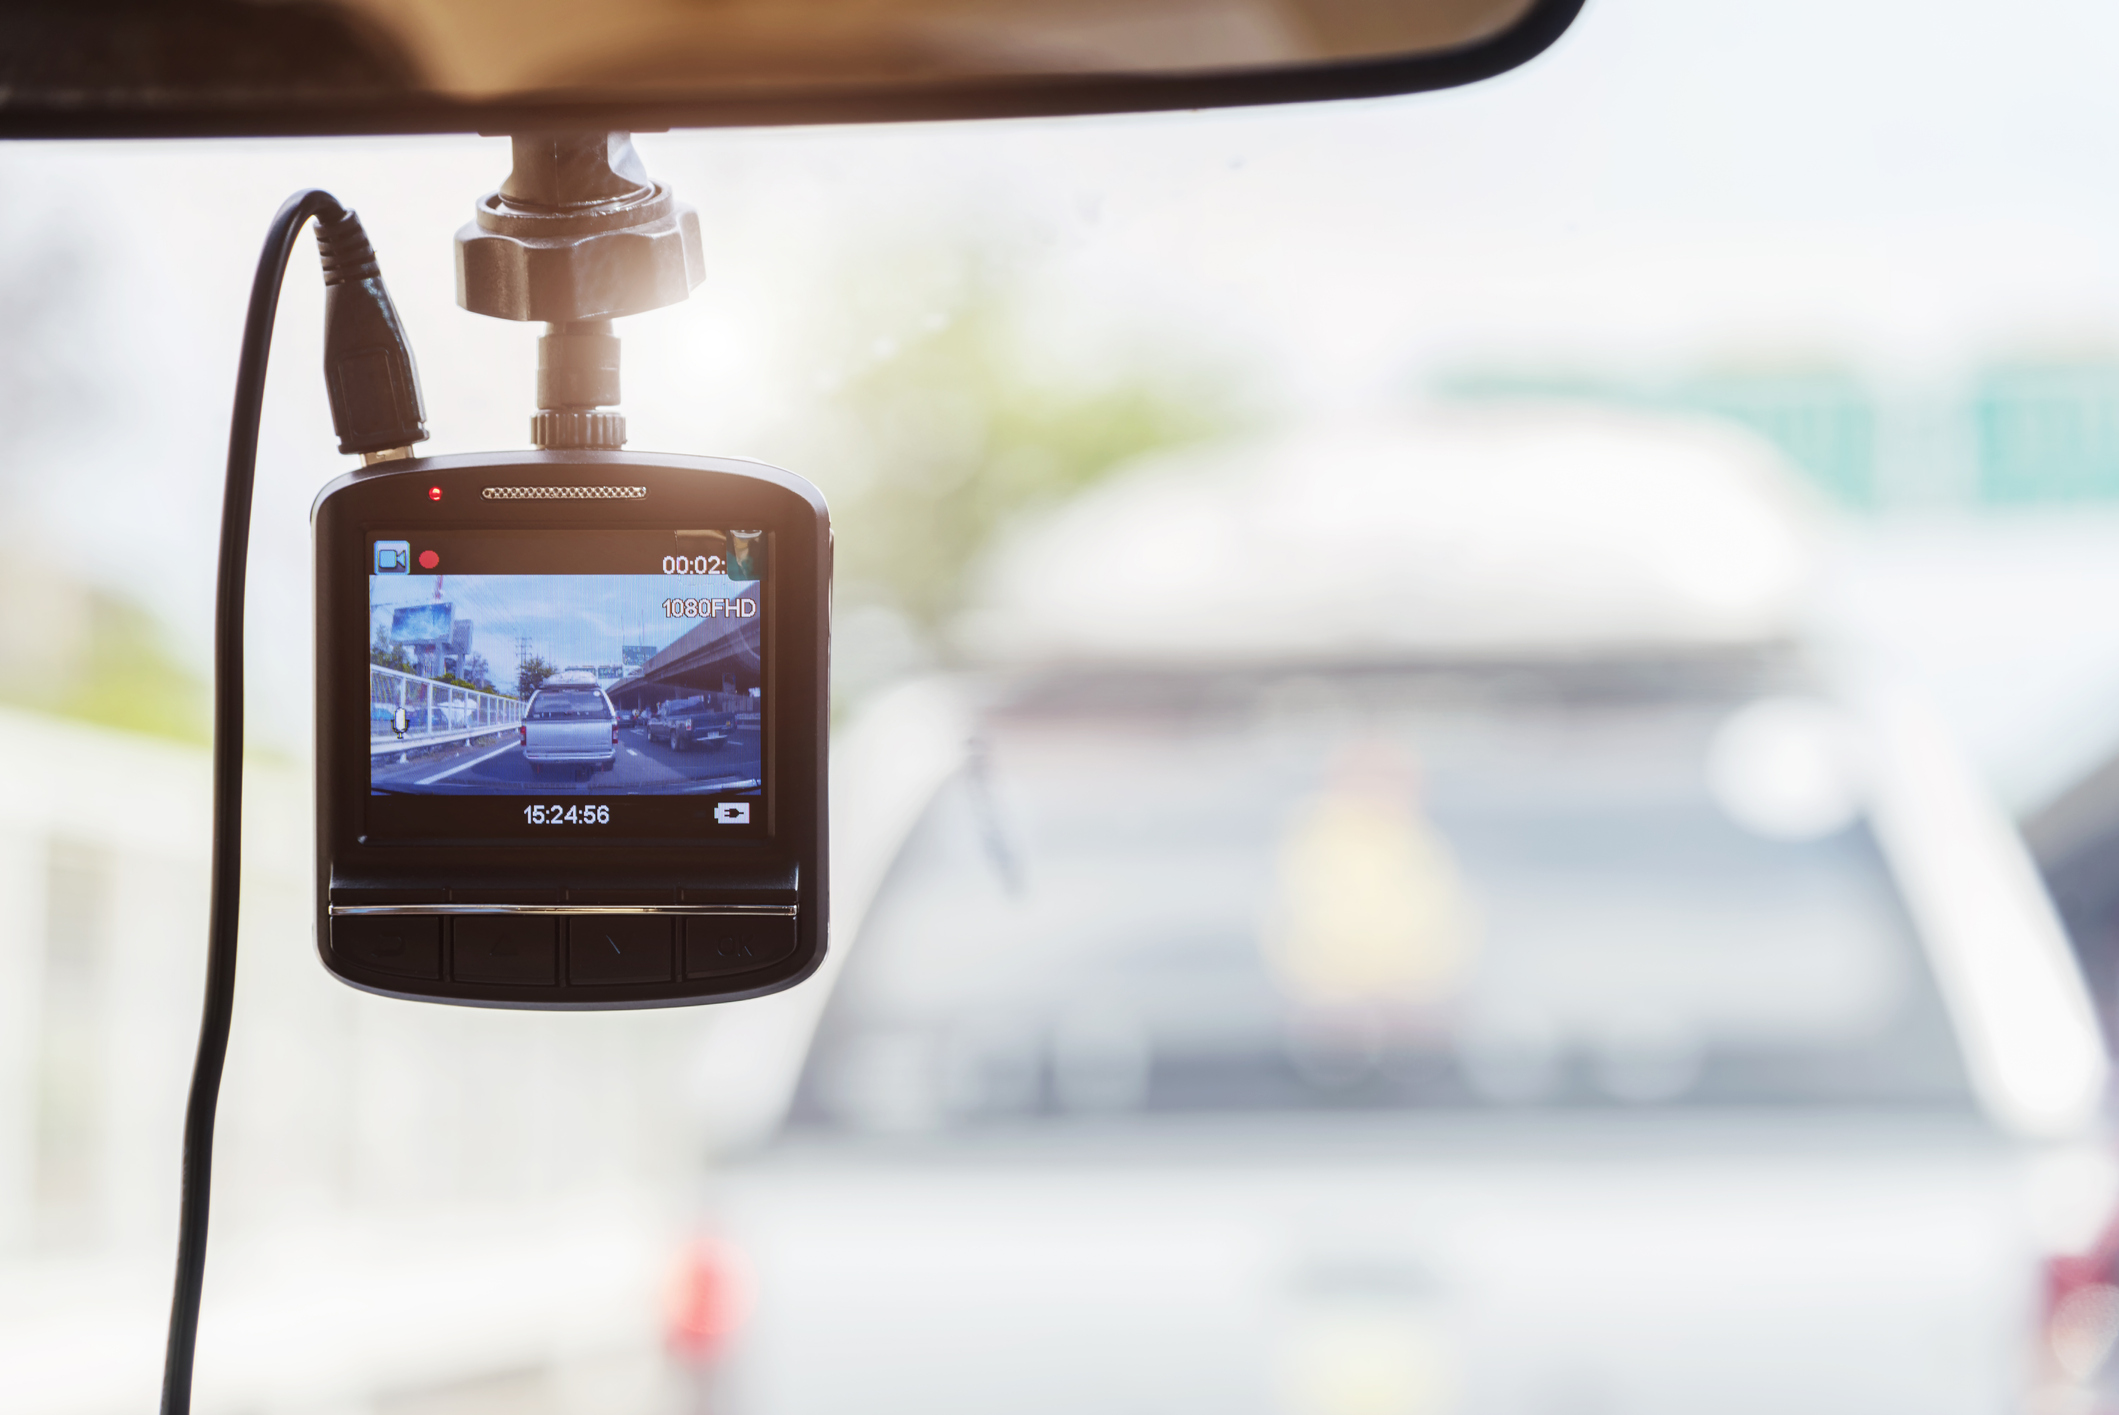 https://www.vargaslawoffice.com/wp-content/uploads/2019/04/Is-it-Legal-to-Install-a-Dash-Cam-in-California.jpg